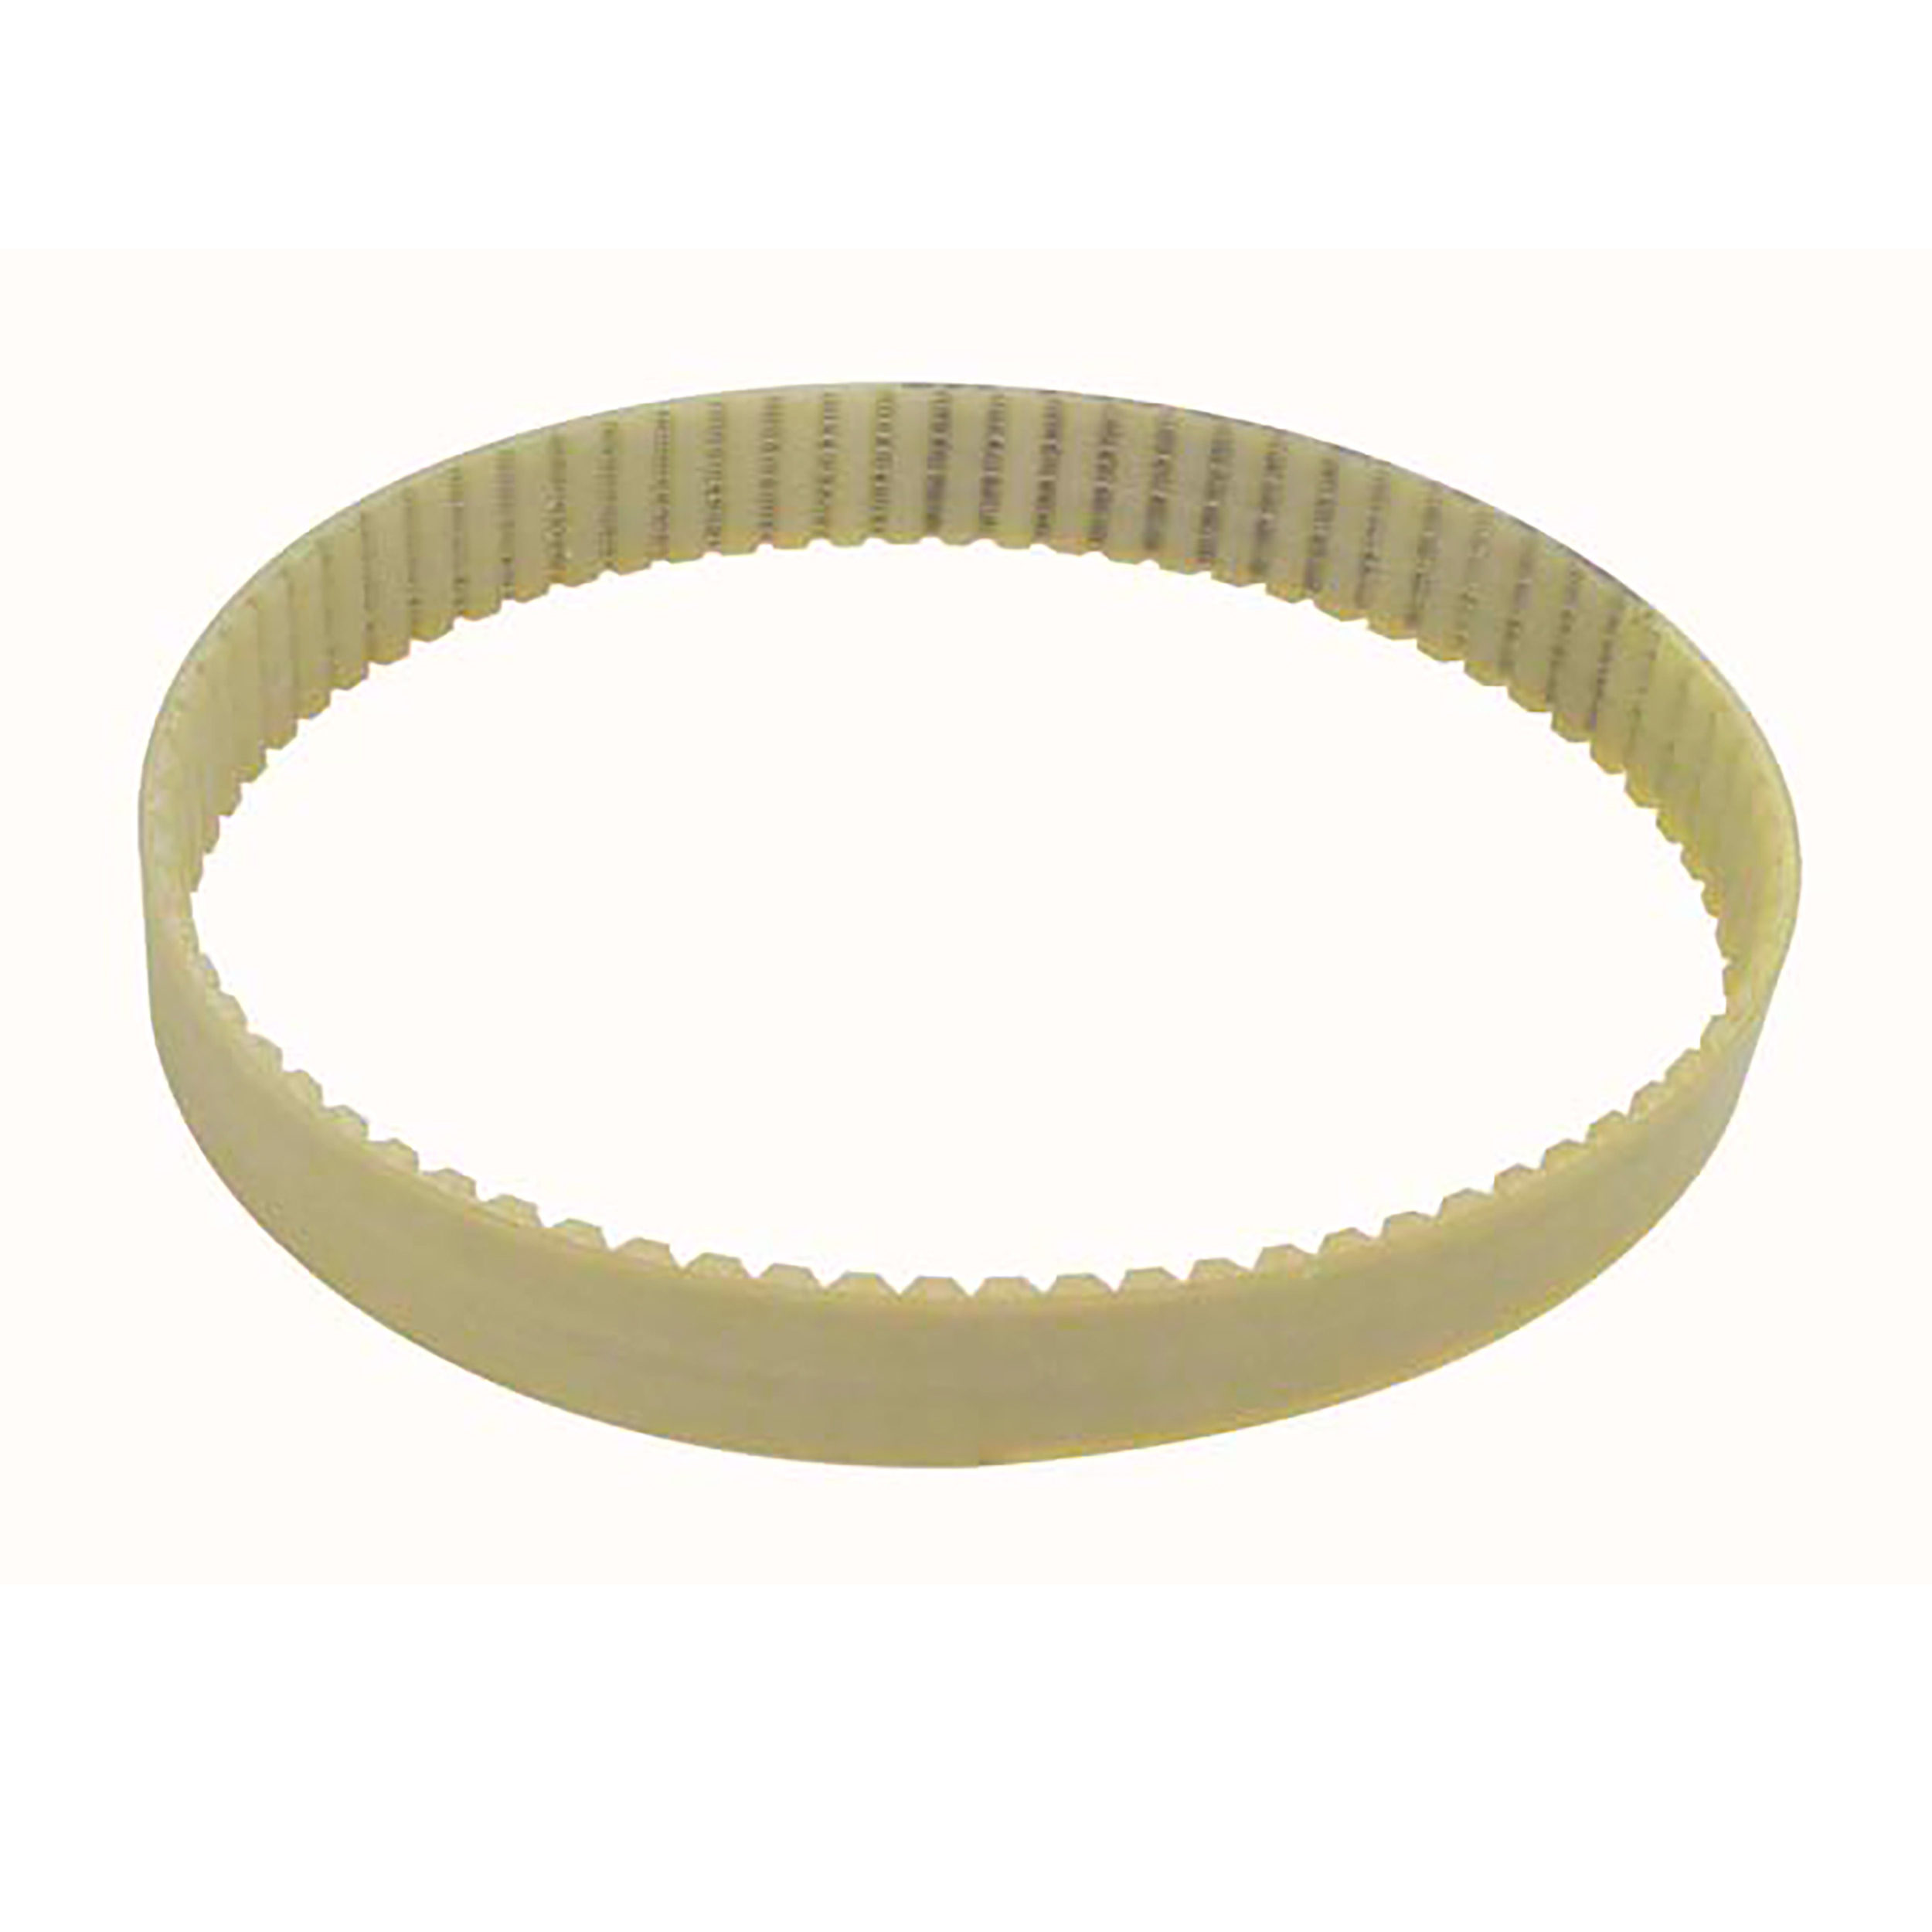 AT type timing belt - AT10 Steel cored polyurethane - 32mm - AT